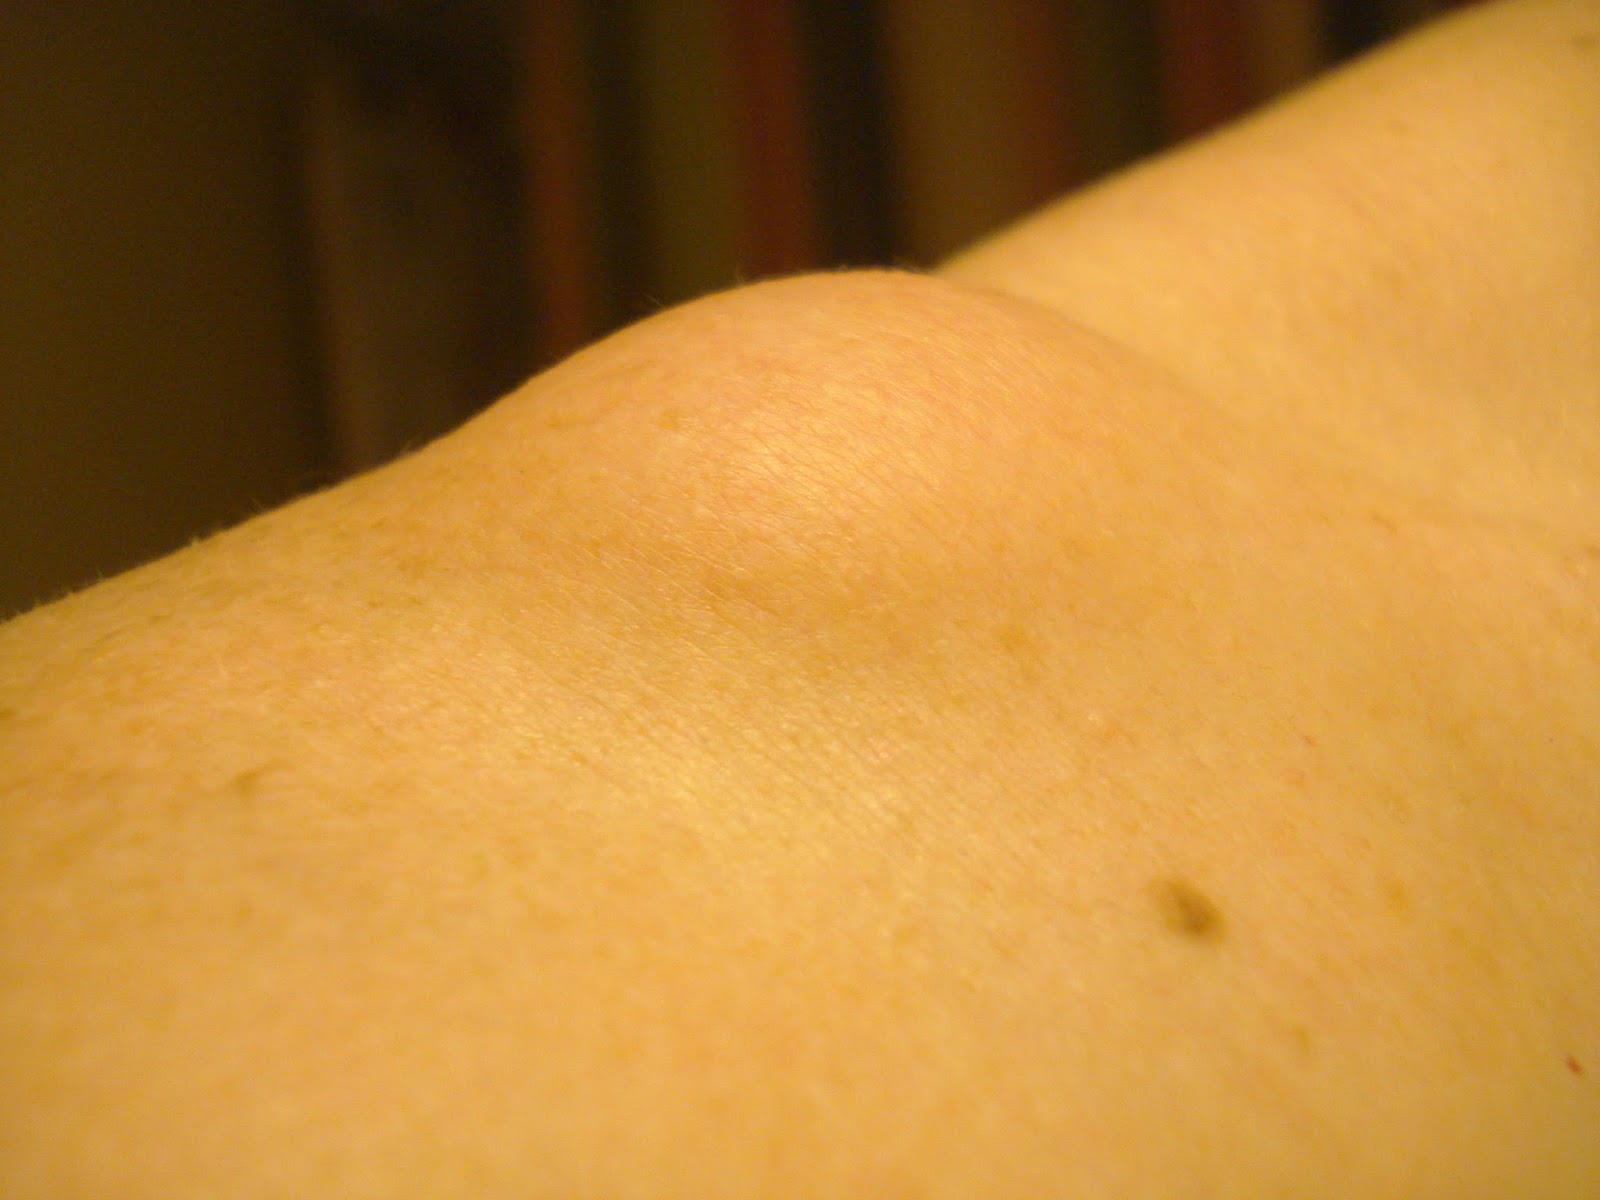 What is this bump on my shoulder? - medical subcutaneous ...